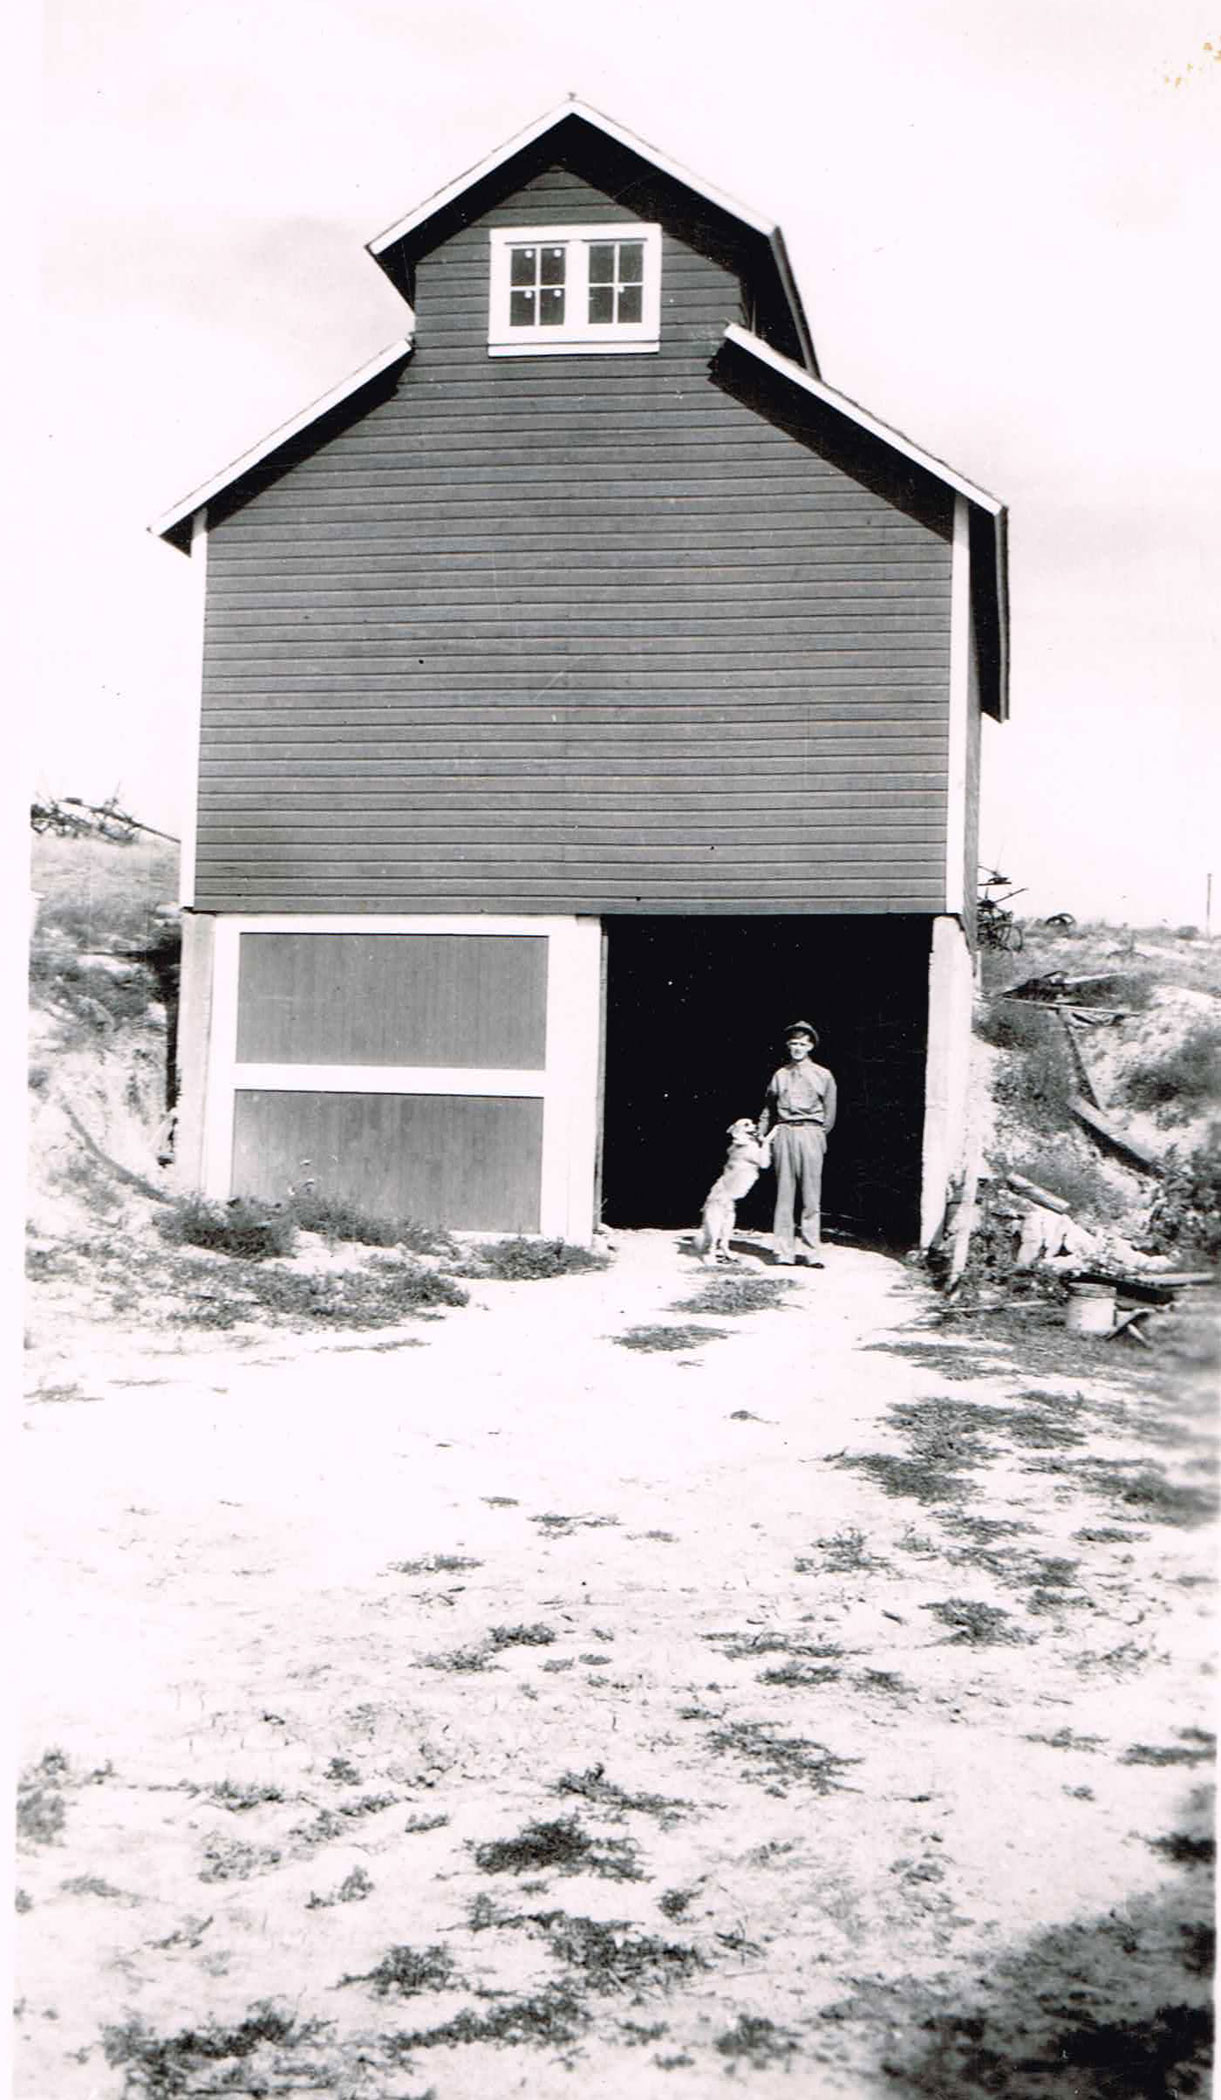 Historic image showing a man and his dog in the doorway of a barn.